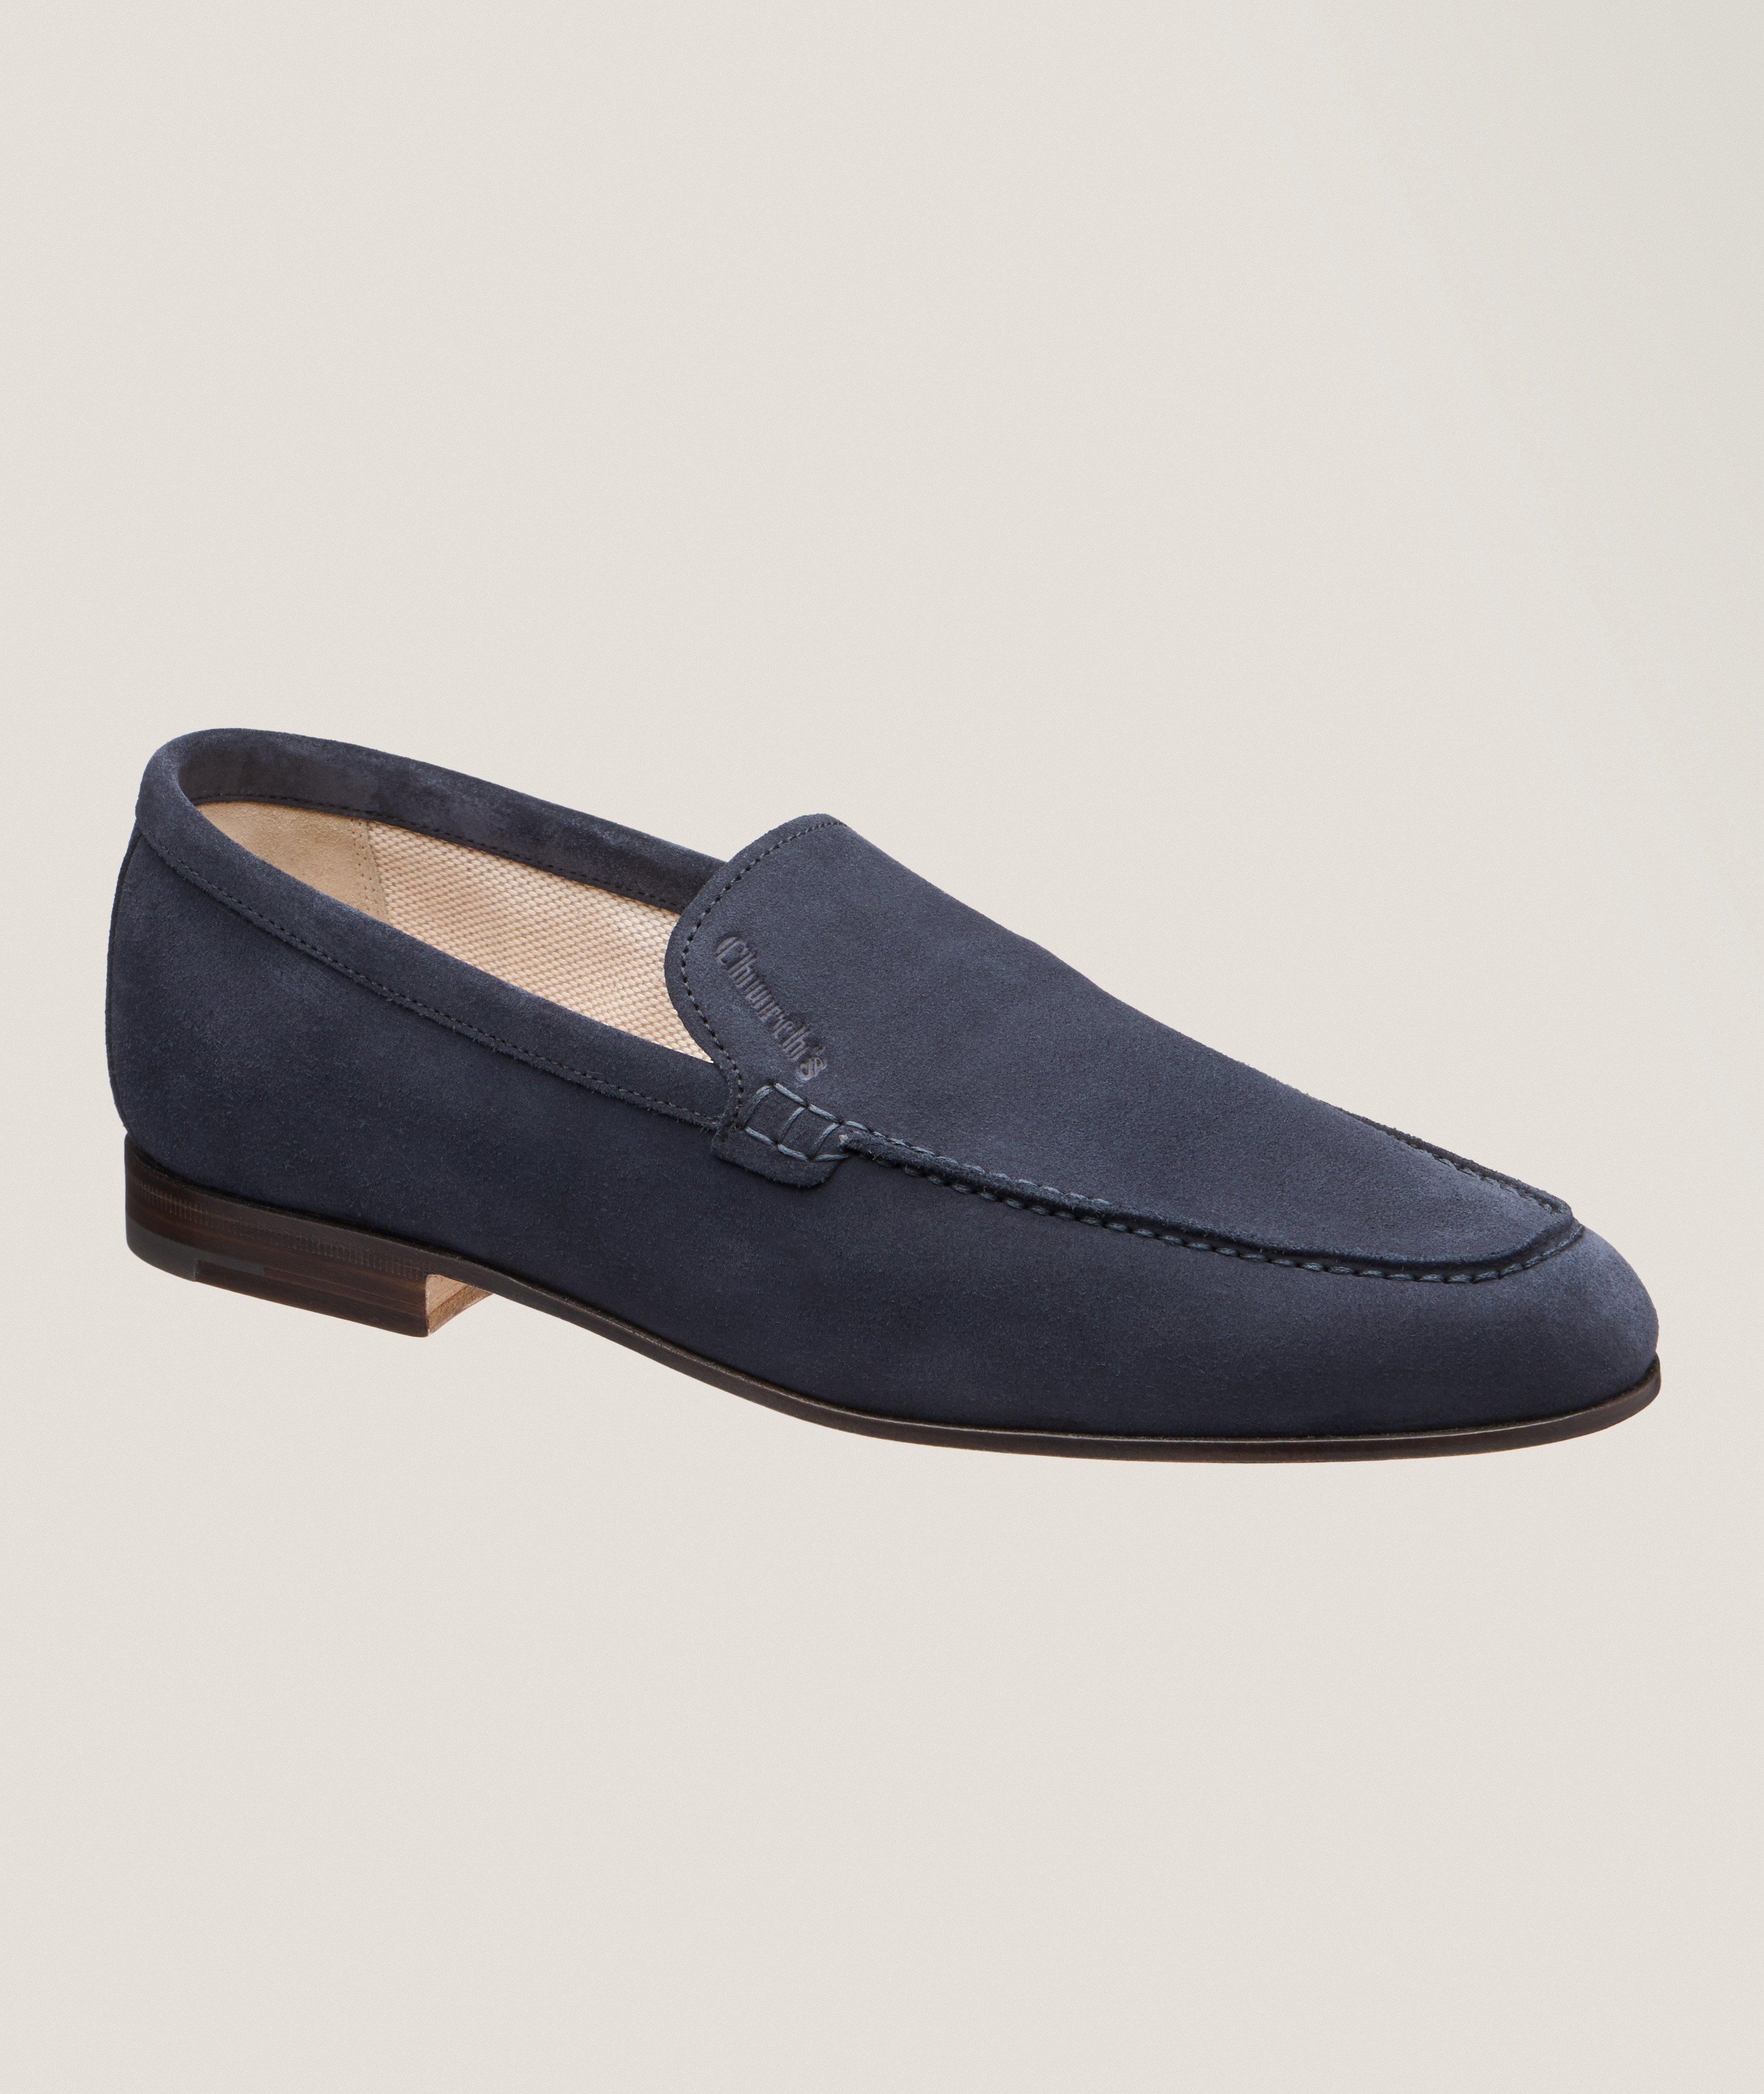 Margate Suede Loafers image 0